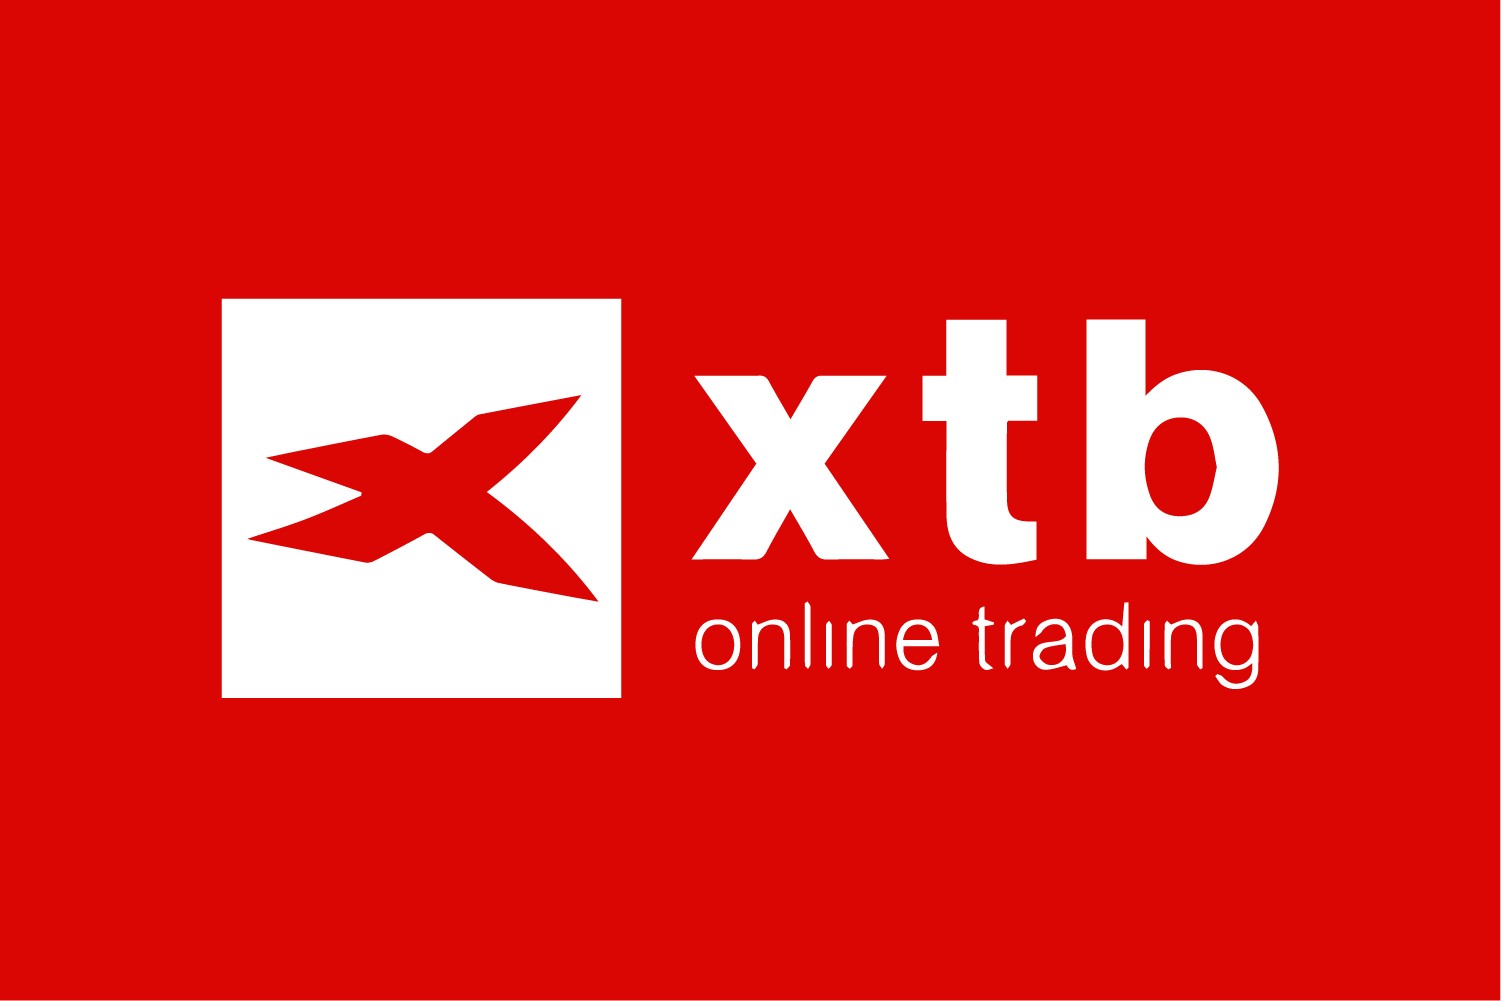 XTB empowers UK investors with expanded access through Fractional Shares